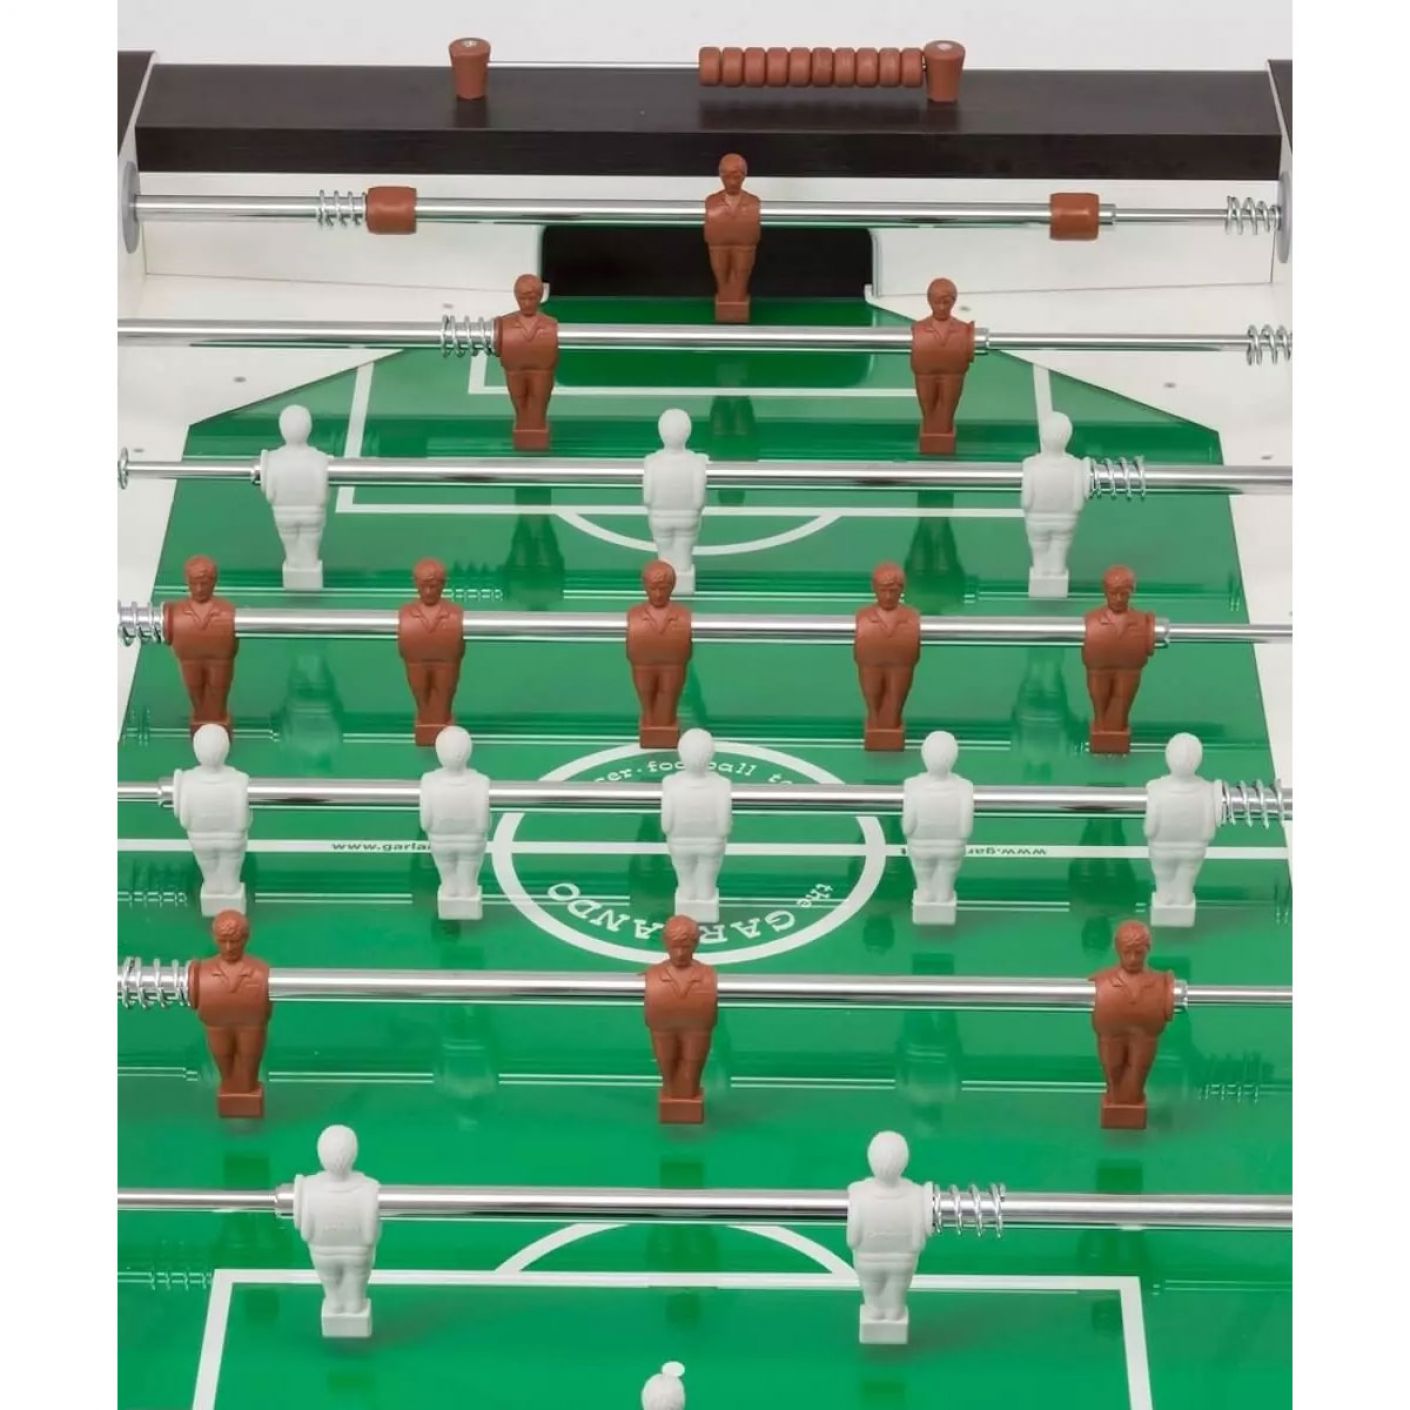 Garlando EXCLUSIVE table football with outgoing rods